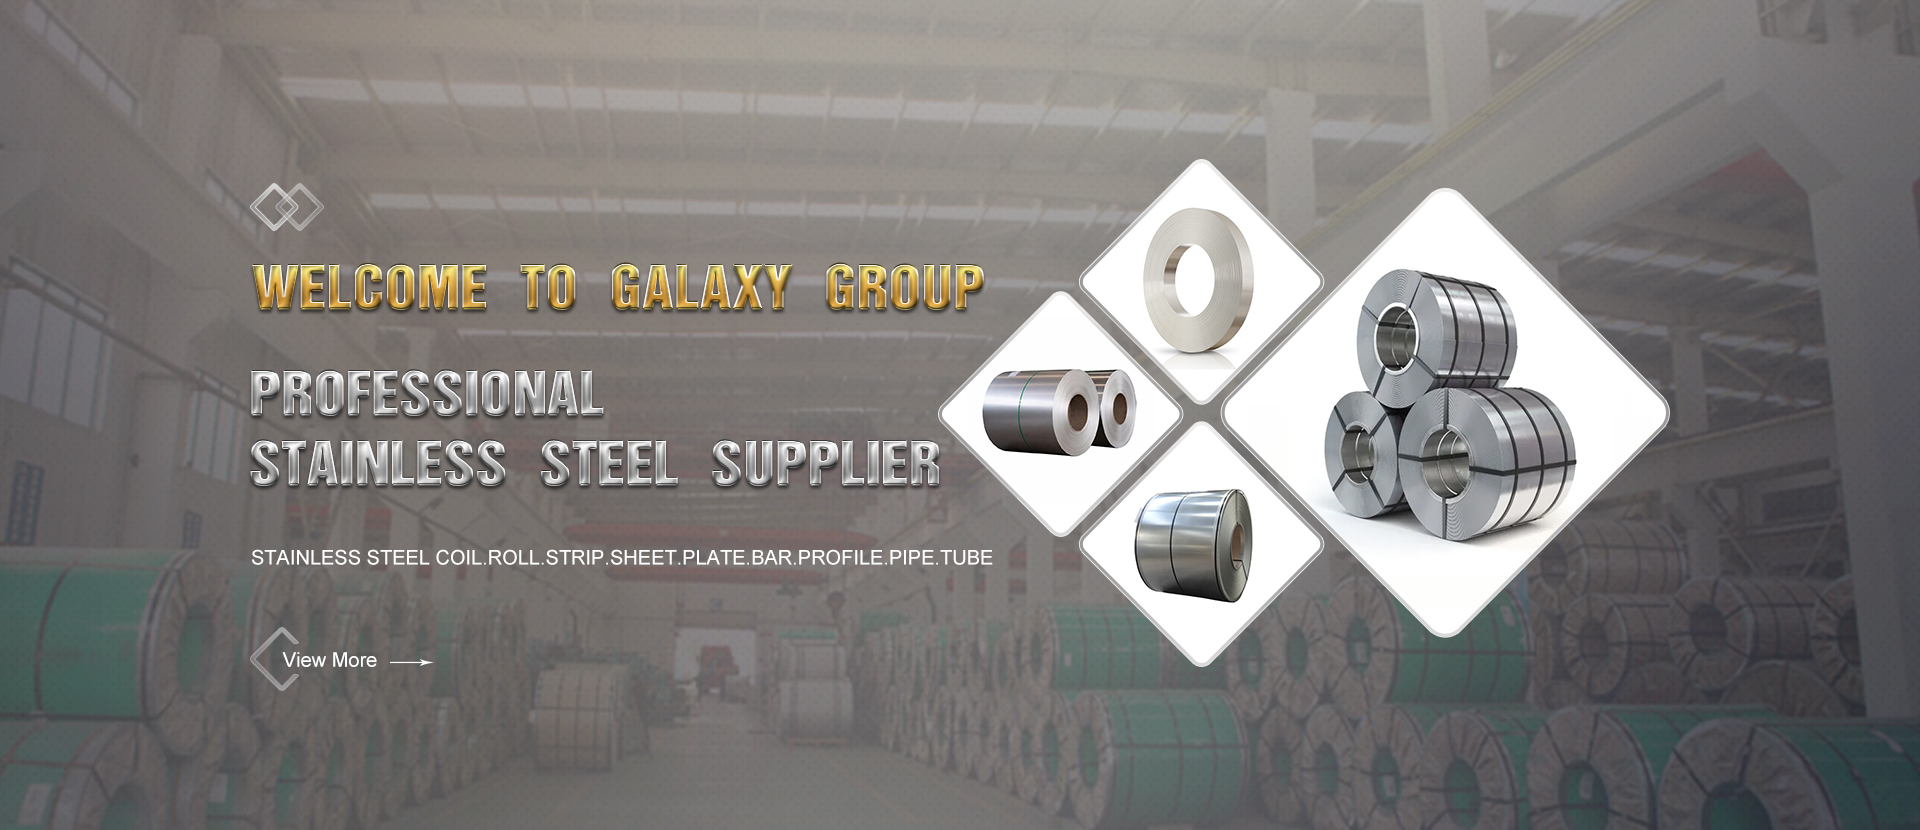 STAINLESS STEEL SUPPLIER